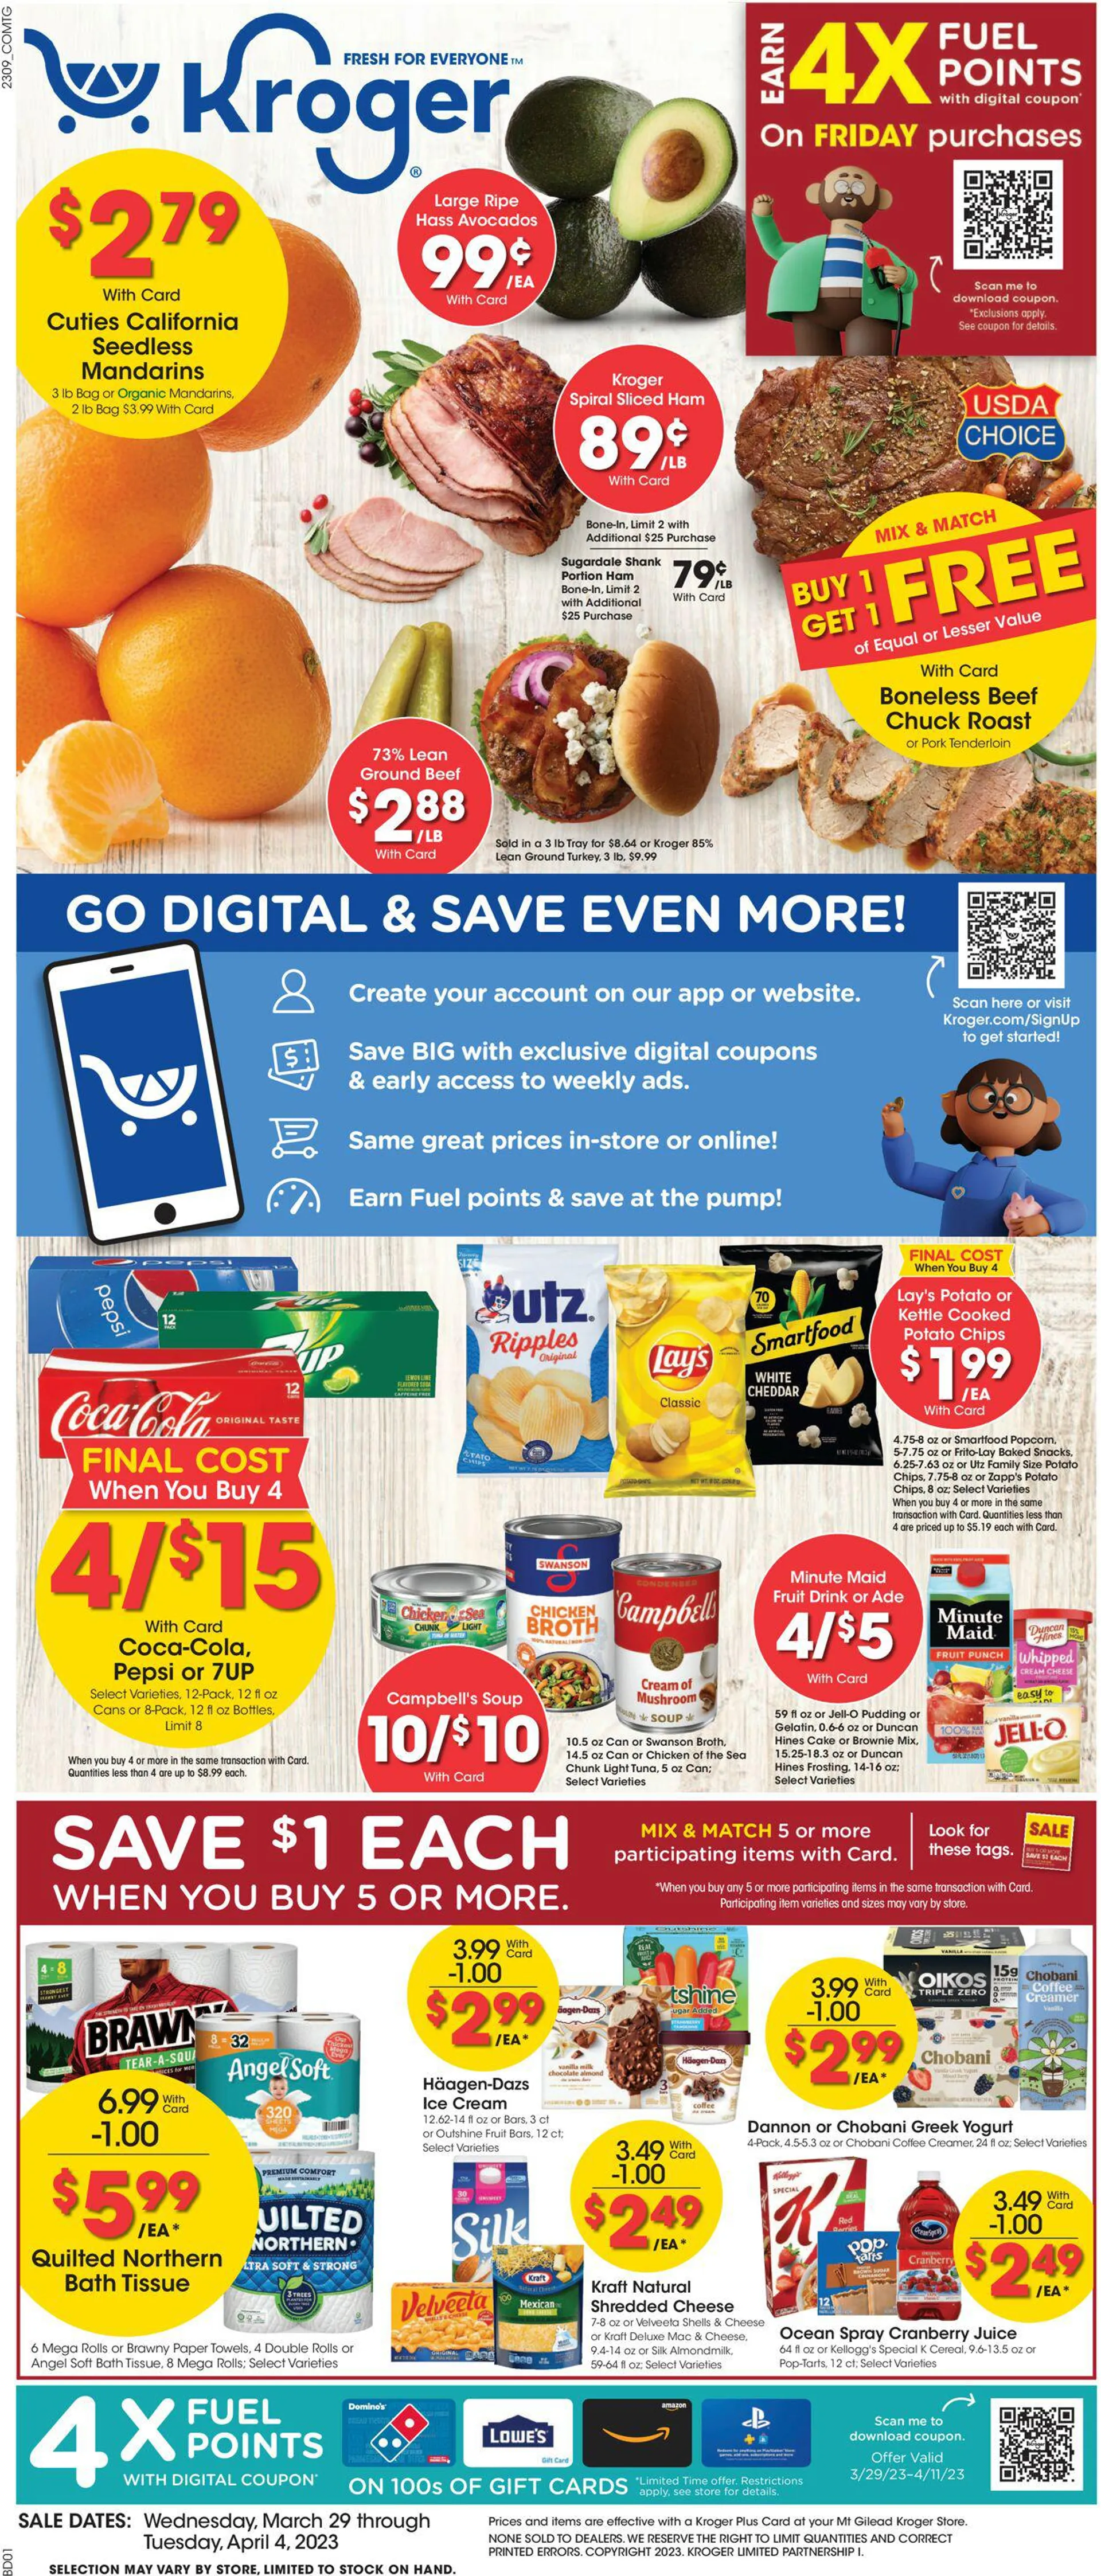 Kroger Current weekly ad - 1